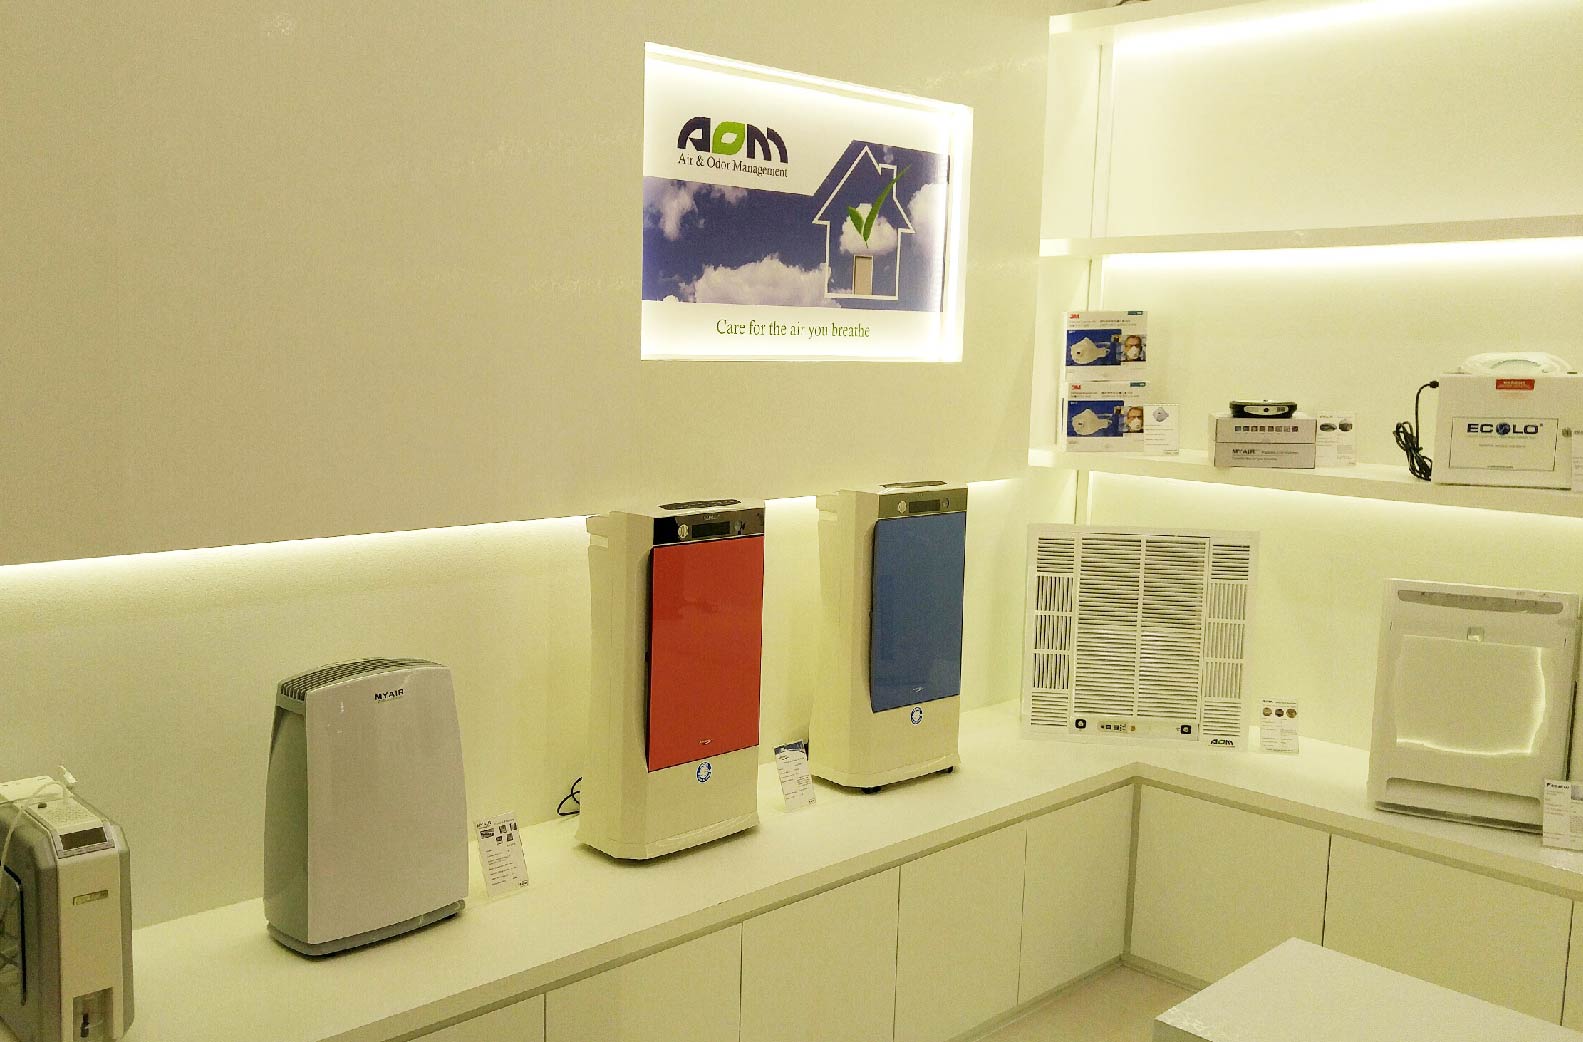 AOM Air and Odor Management Air Wellness Proshop products displayed